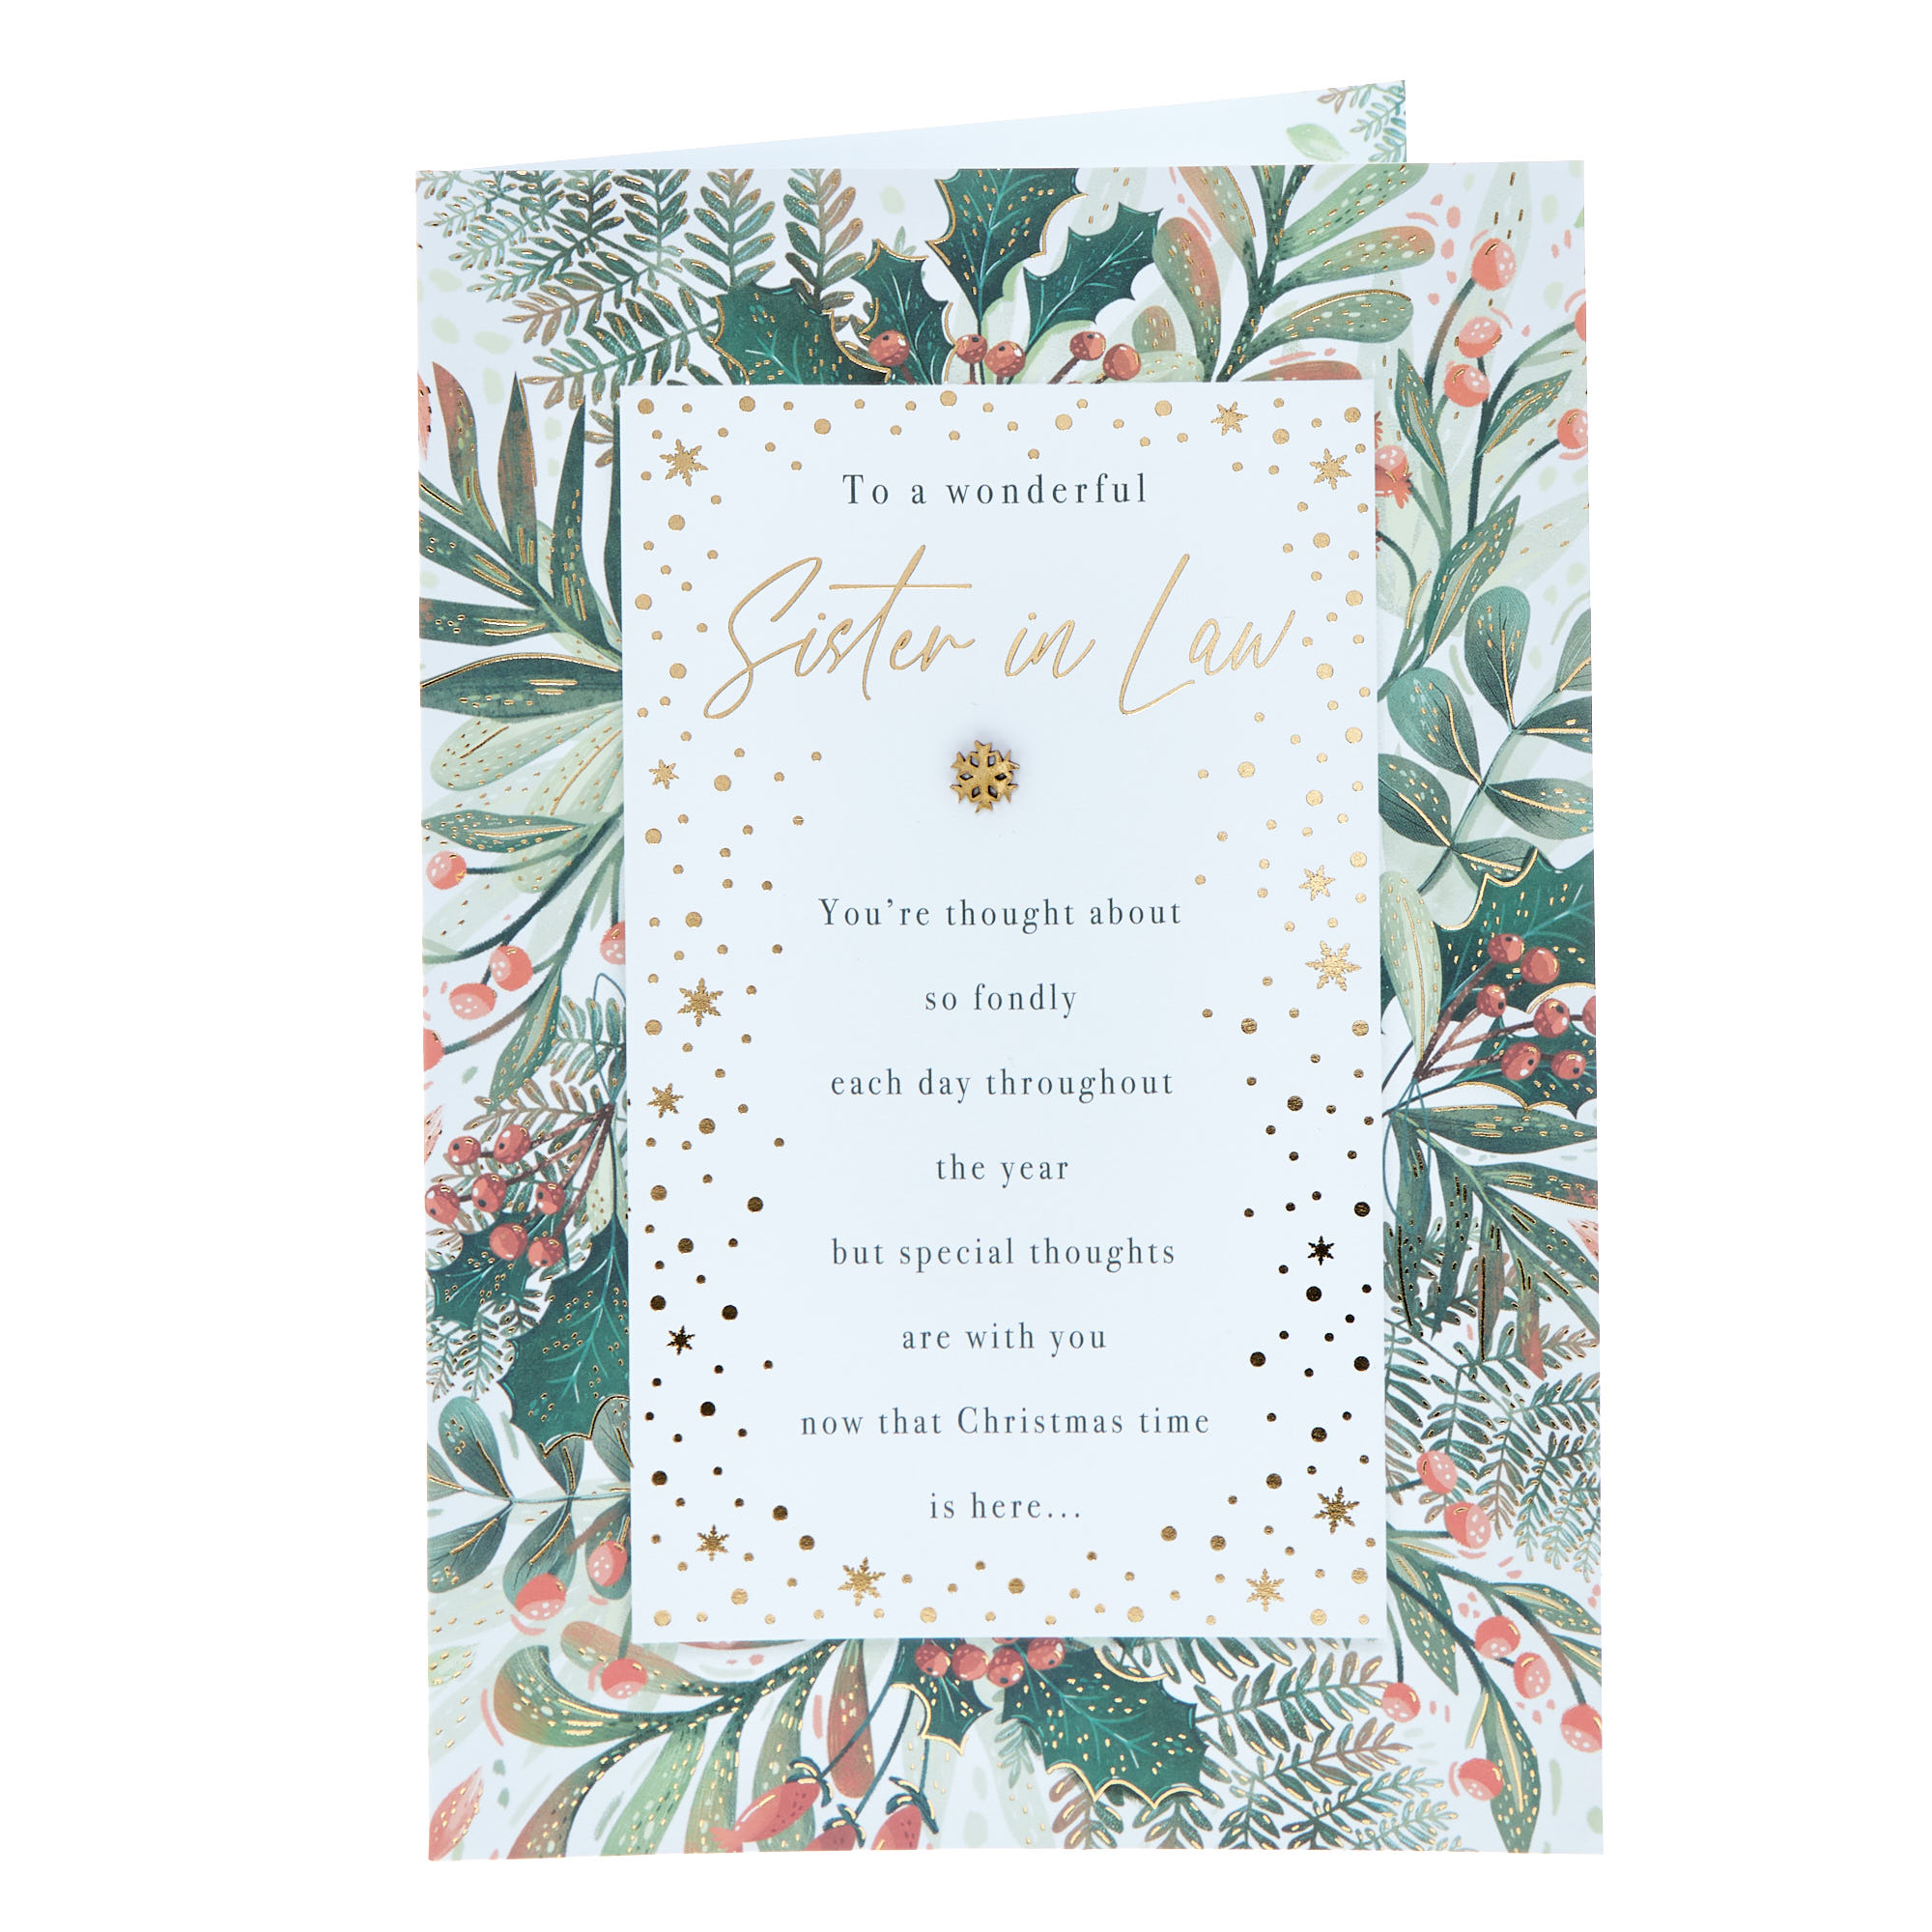 Sister In Law Sentimental Verse & Foliage Christmas Card